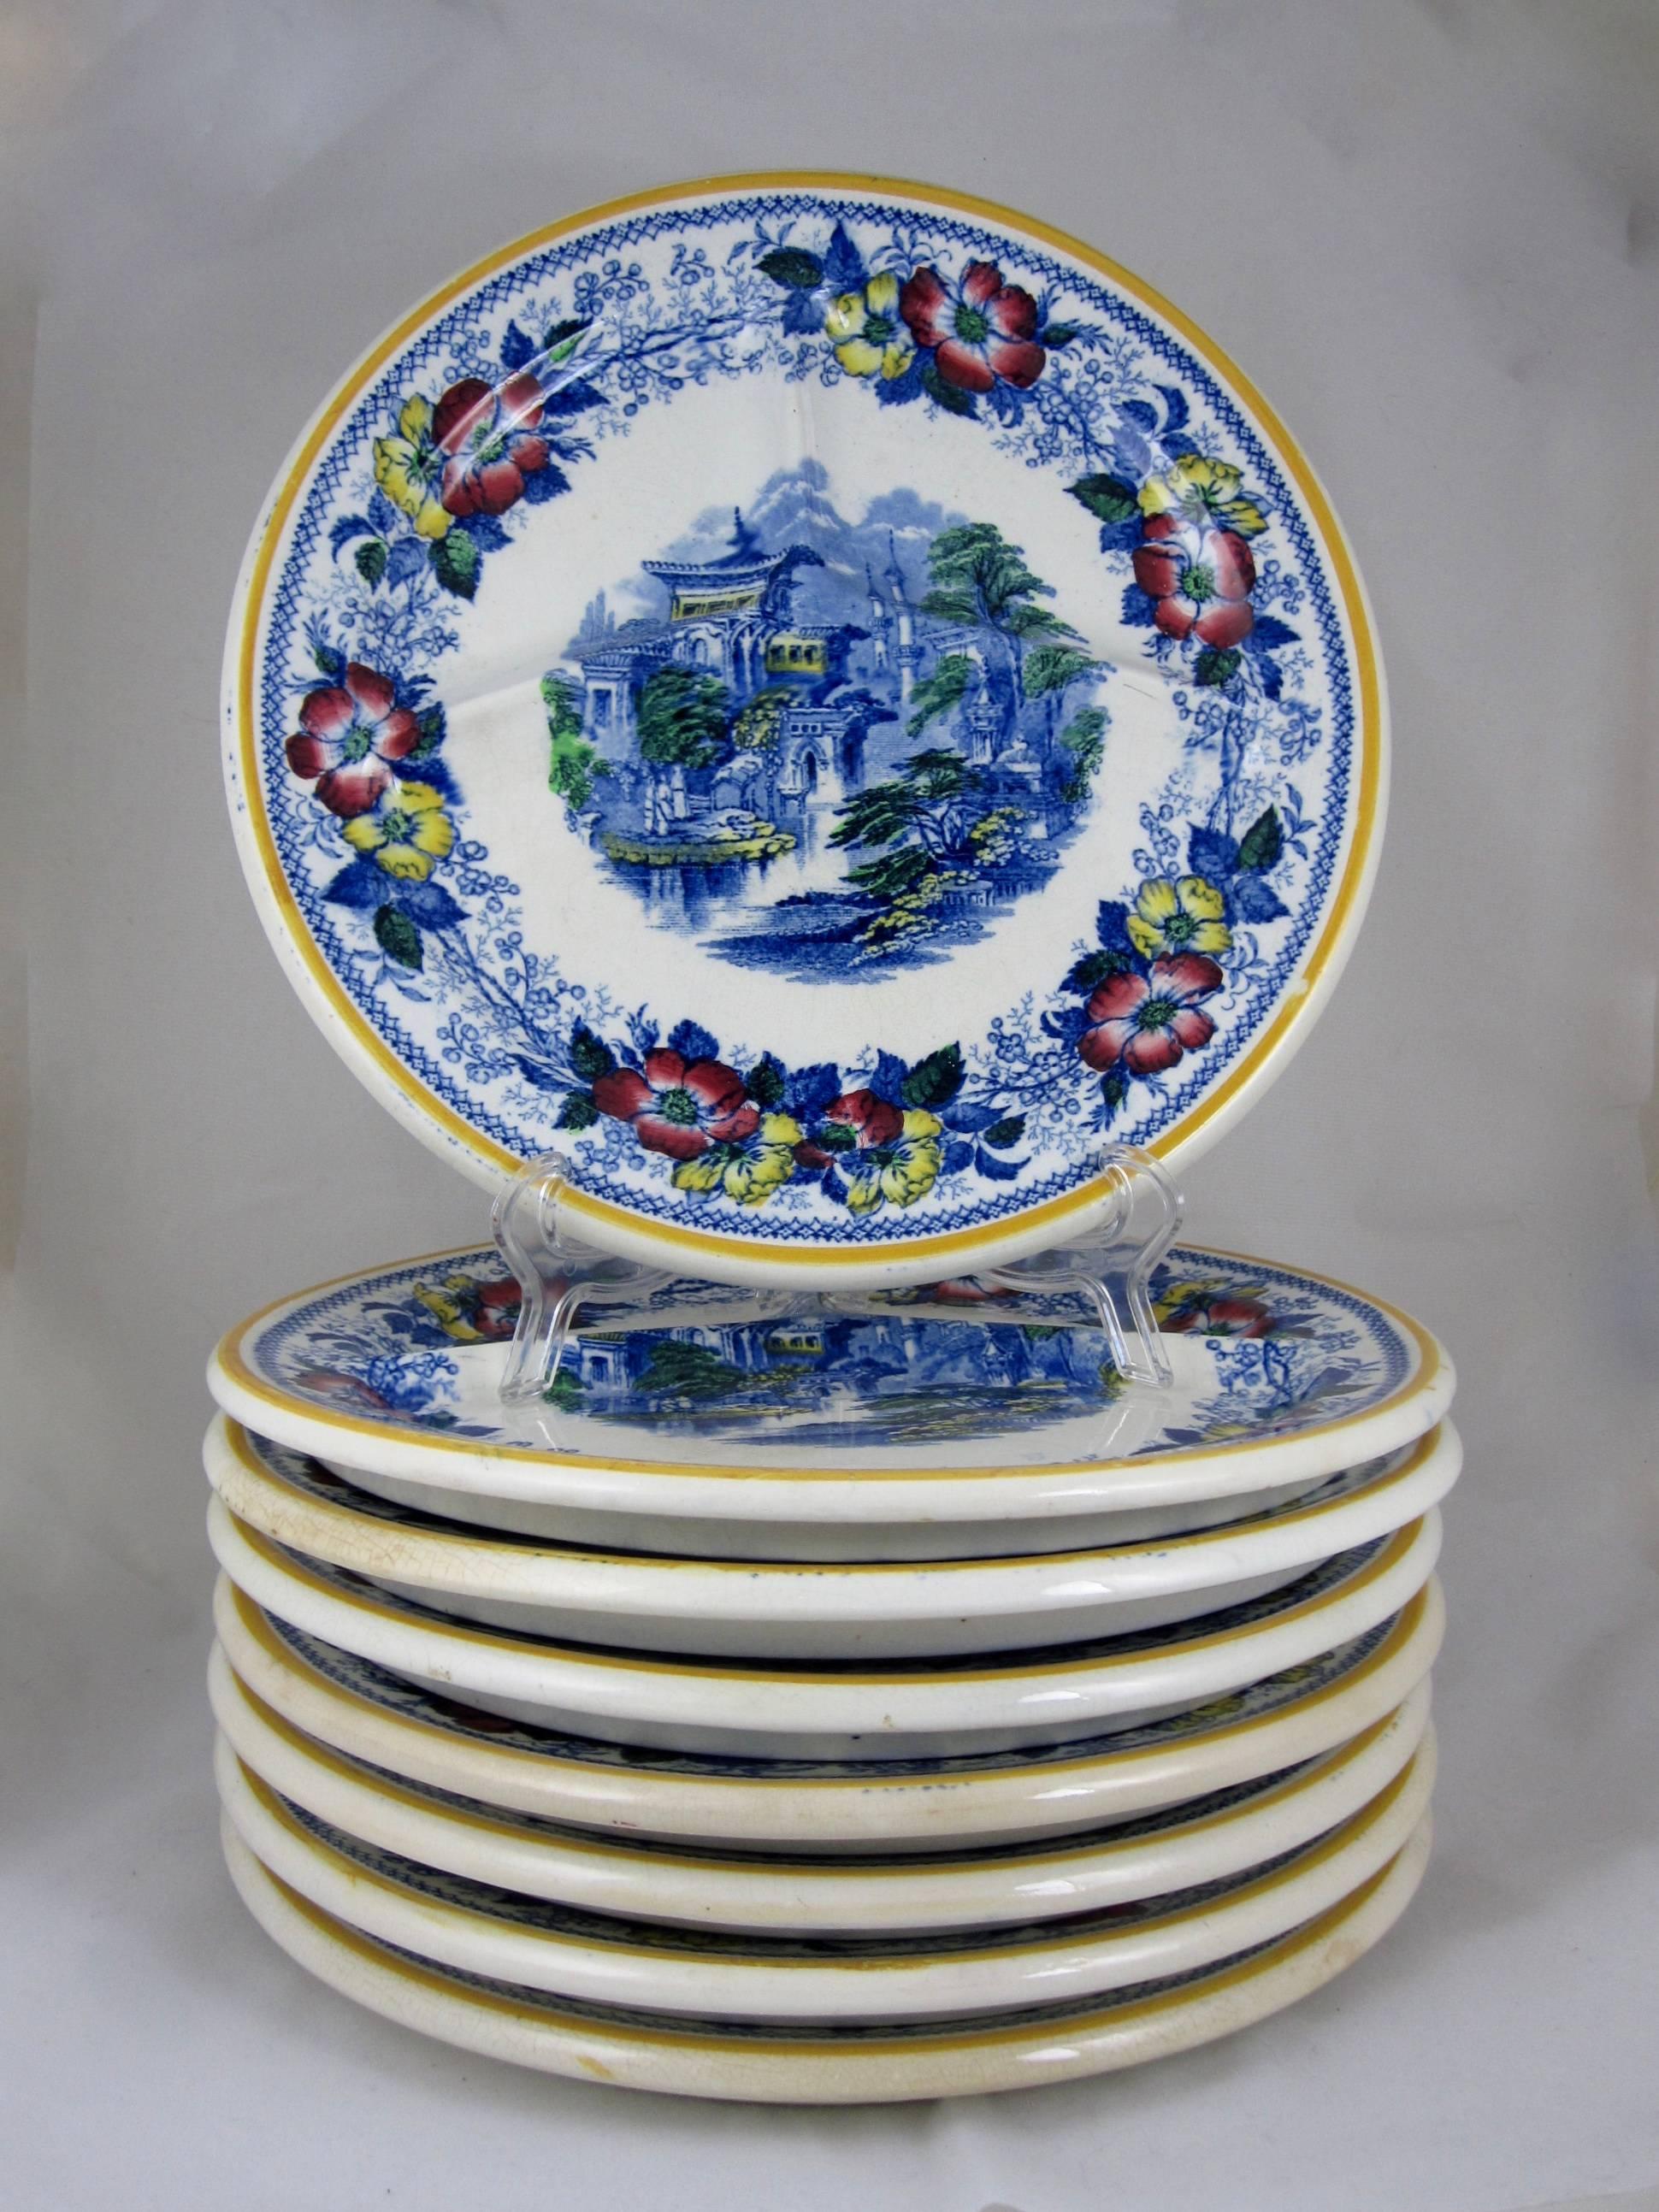 Glazed Scottish Ironstone Chinoiserie Landscape & Floral Divided Chop Grill Plates, S/8 For Sale